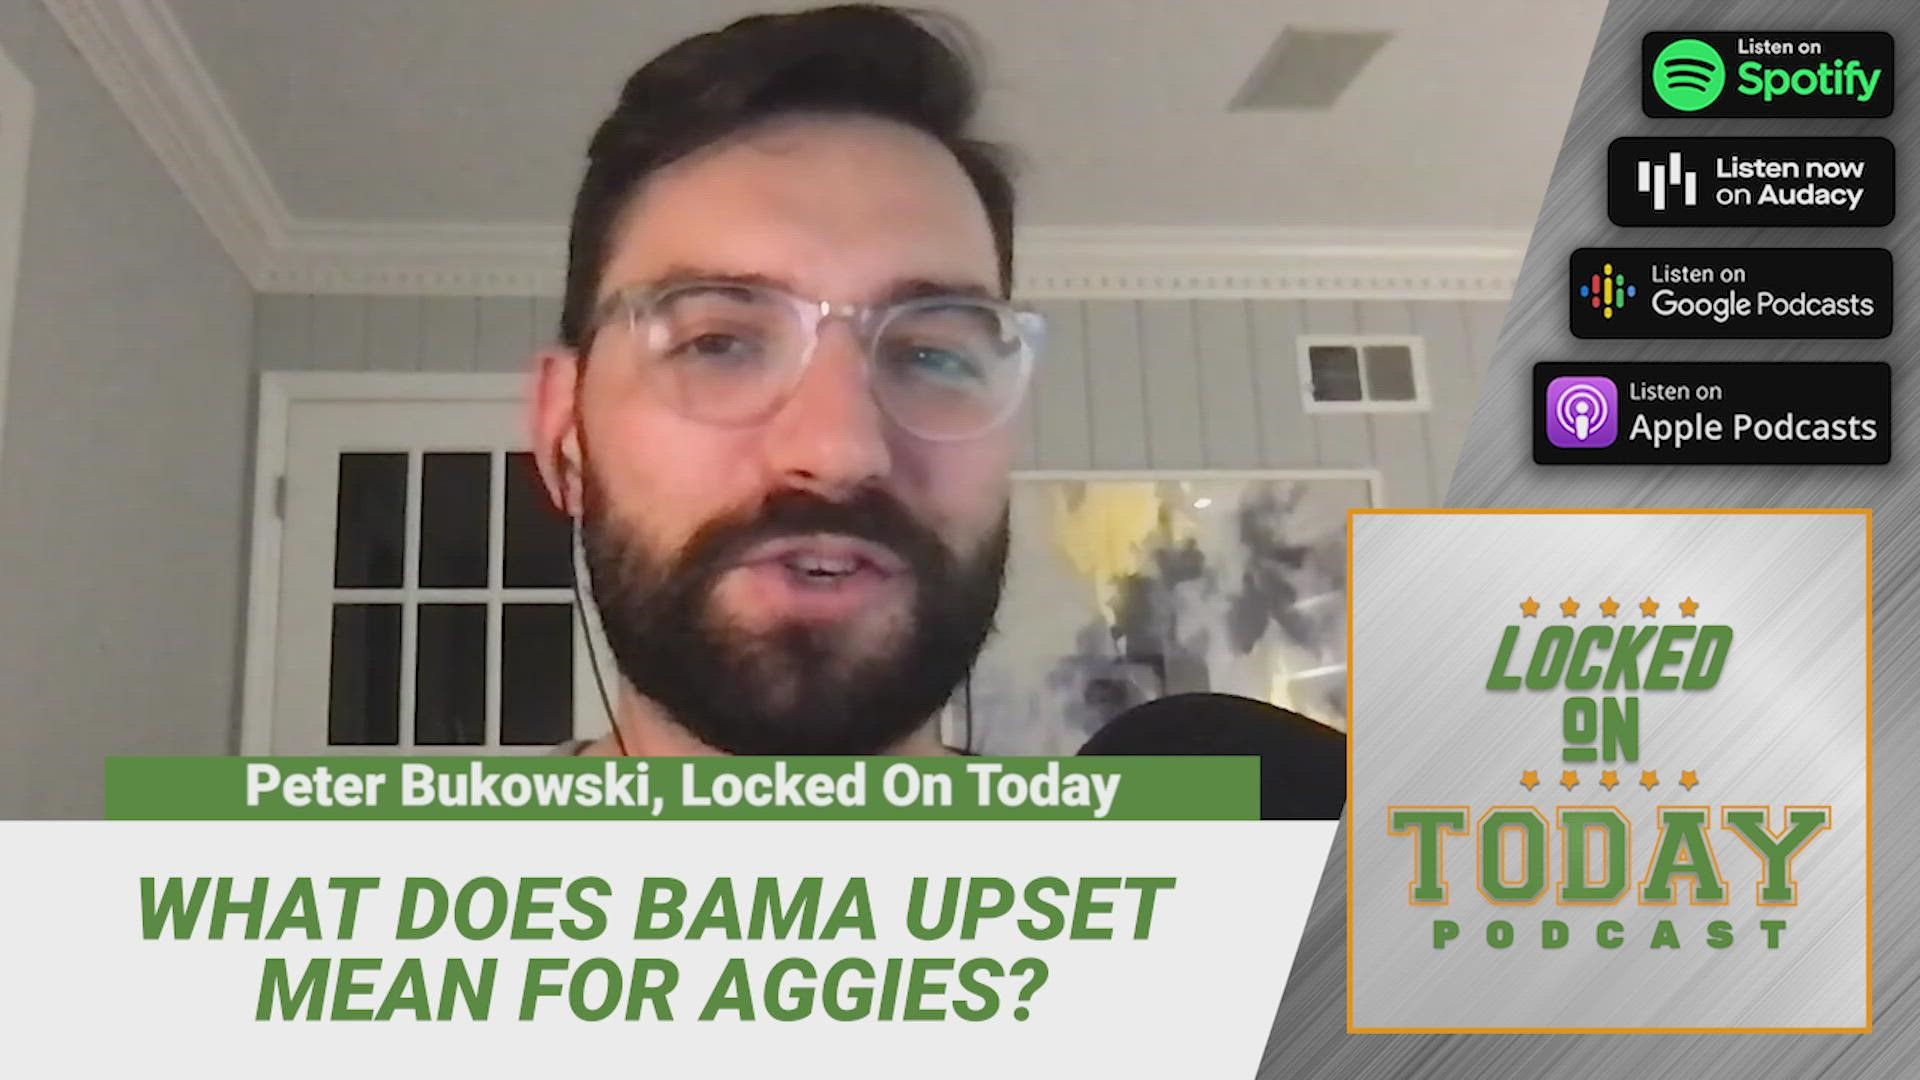 Locked On Aggies host Cole Thompson joins Peter Bukowski on Locked On Today to react to the win over Alabama on Saturday.